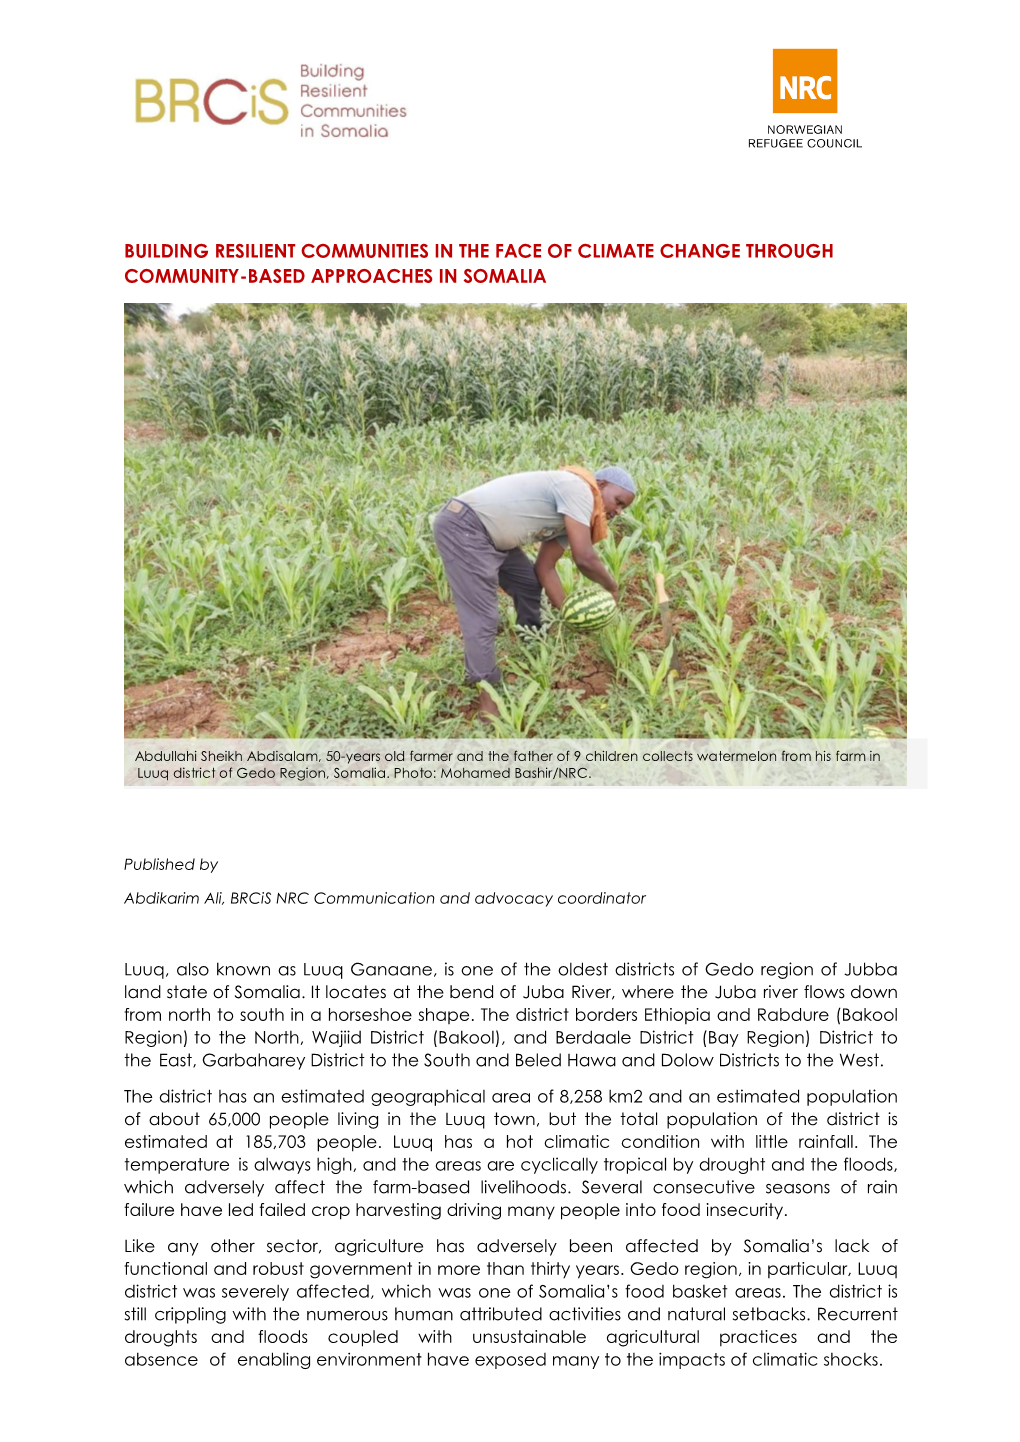 Building Resilient Communities in the Face of Climate Change Through Community-Based Approaches in Somalia